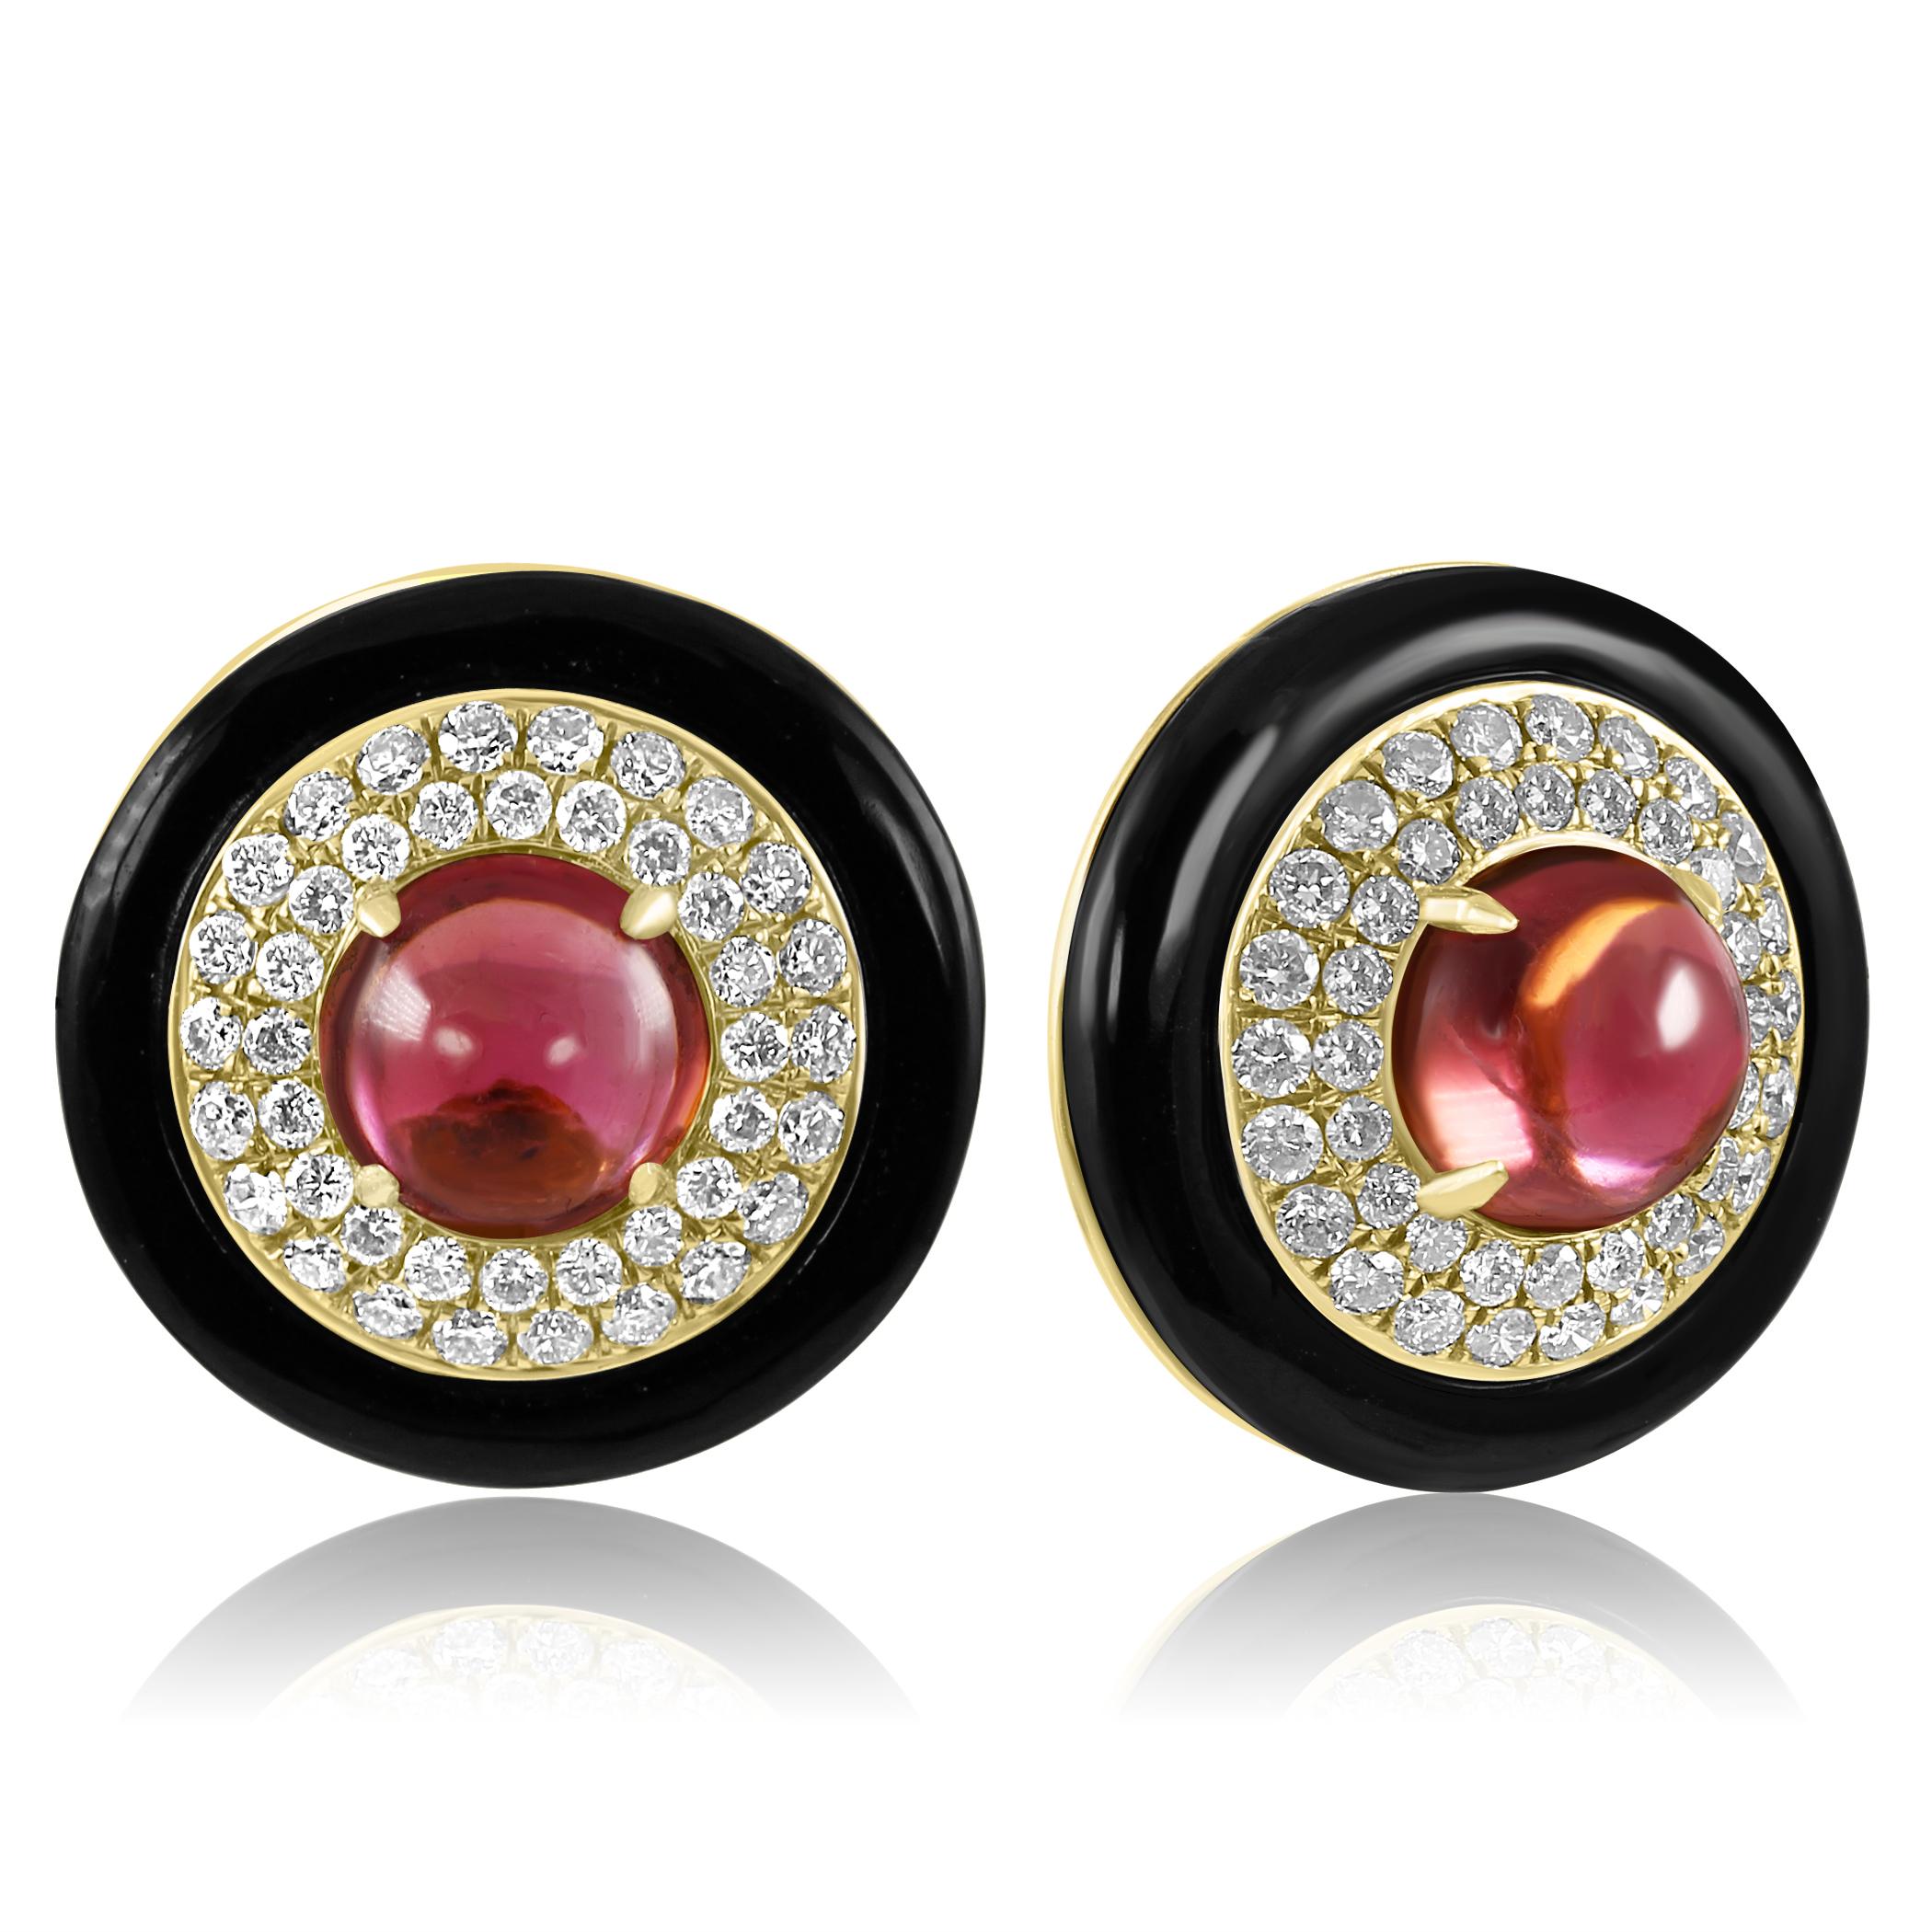 At the heart of each earring, gorgeous Pink Tourmaline Rounds weighing a total of 4.43 carats command attention with their vivid hue and alluring sparkle. These stunning gemstones, known for their unique pink tones, symbolize compassion and love,